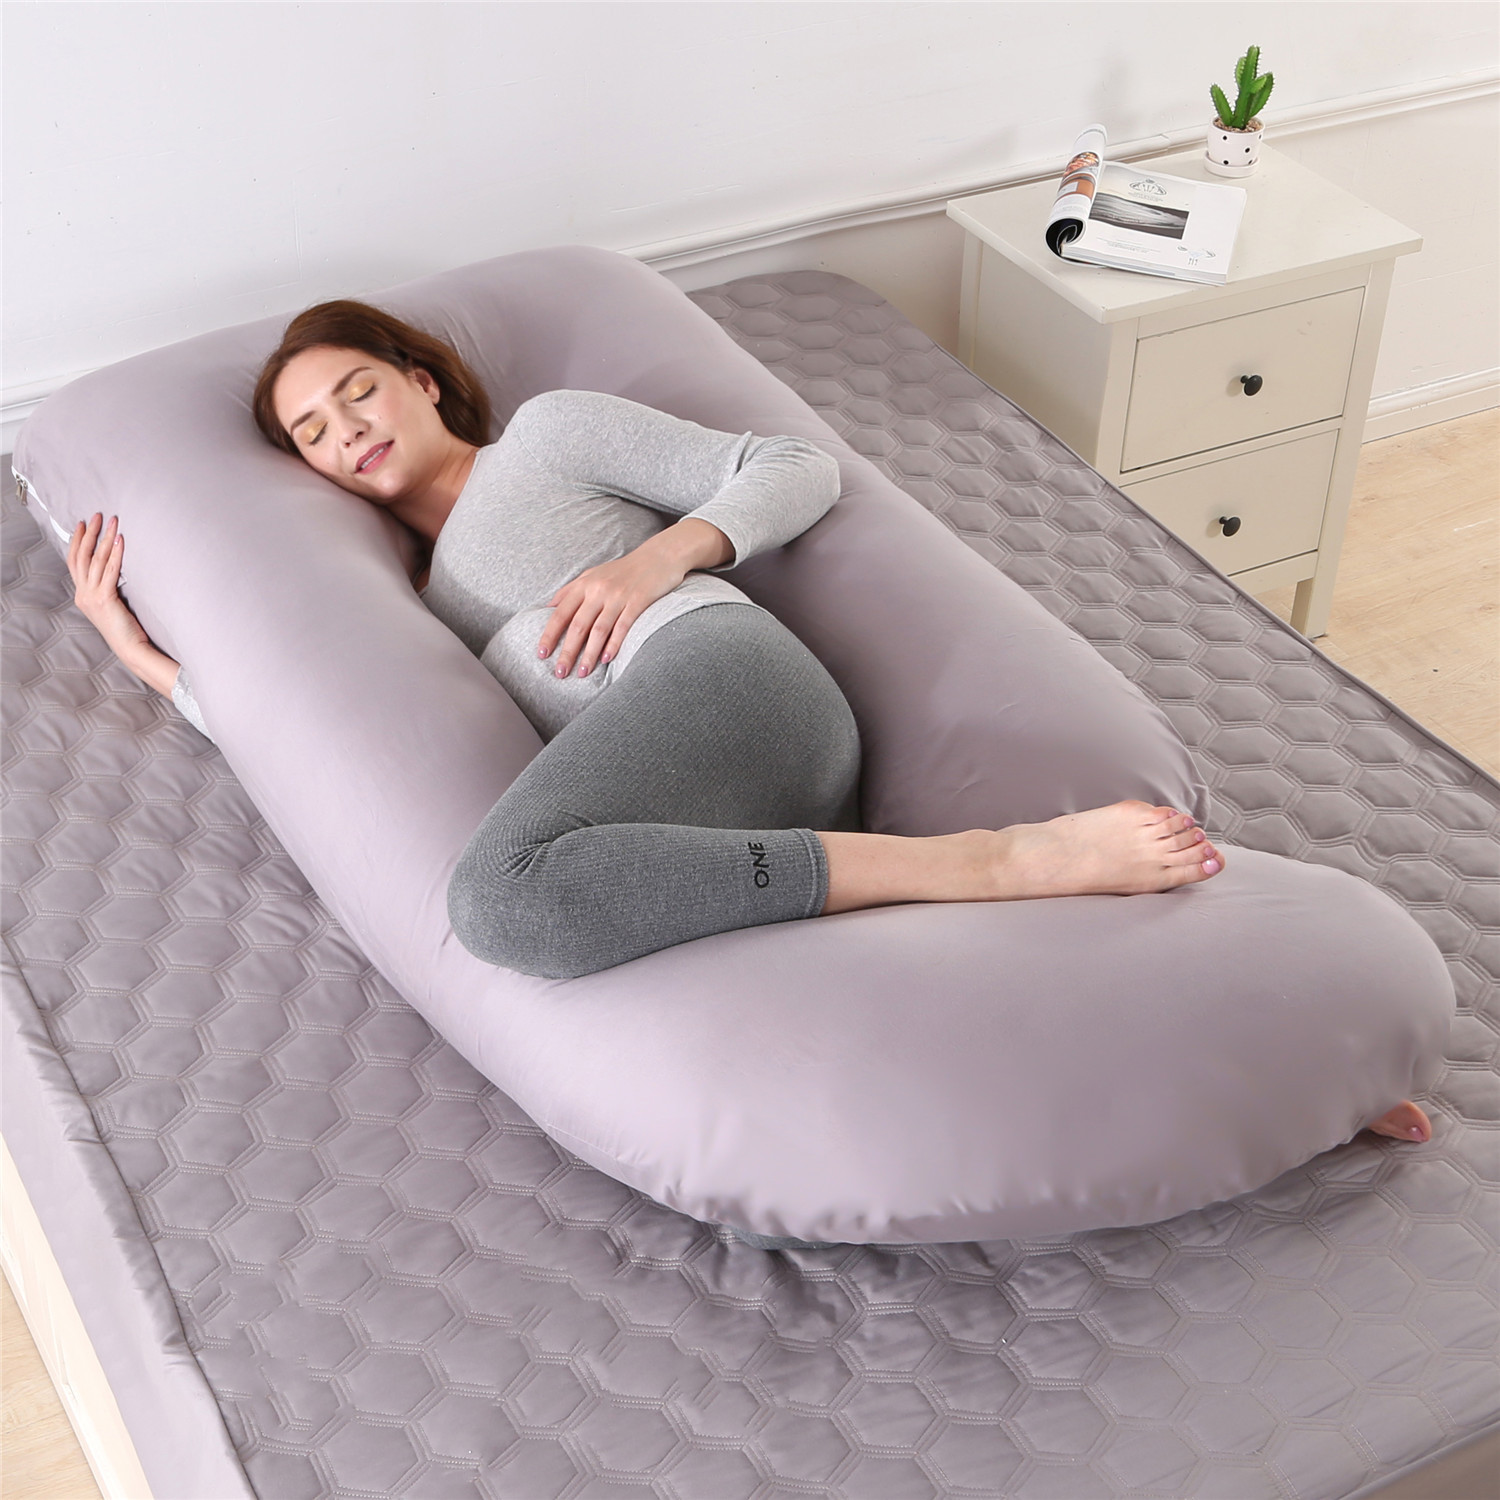 Lie On The Bed Sleeping Pillow Lie On The Bed Artifact Multifunctional Prone  Position Lie Pillow Lie Sleeping Lie Pillow Cushion - AliExpress